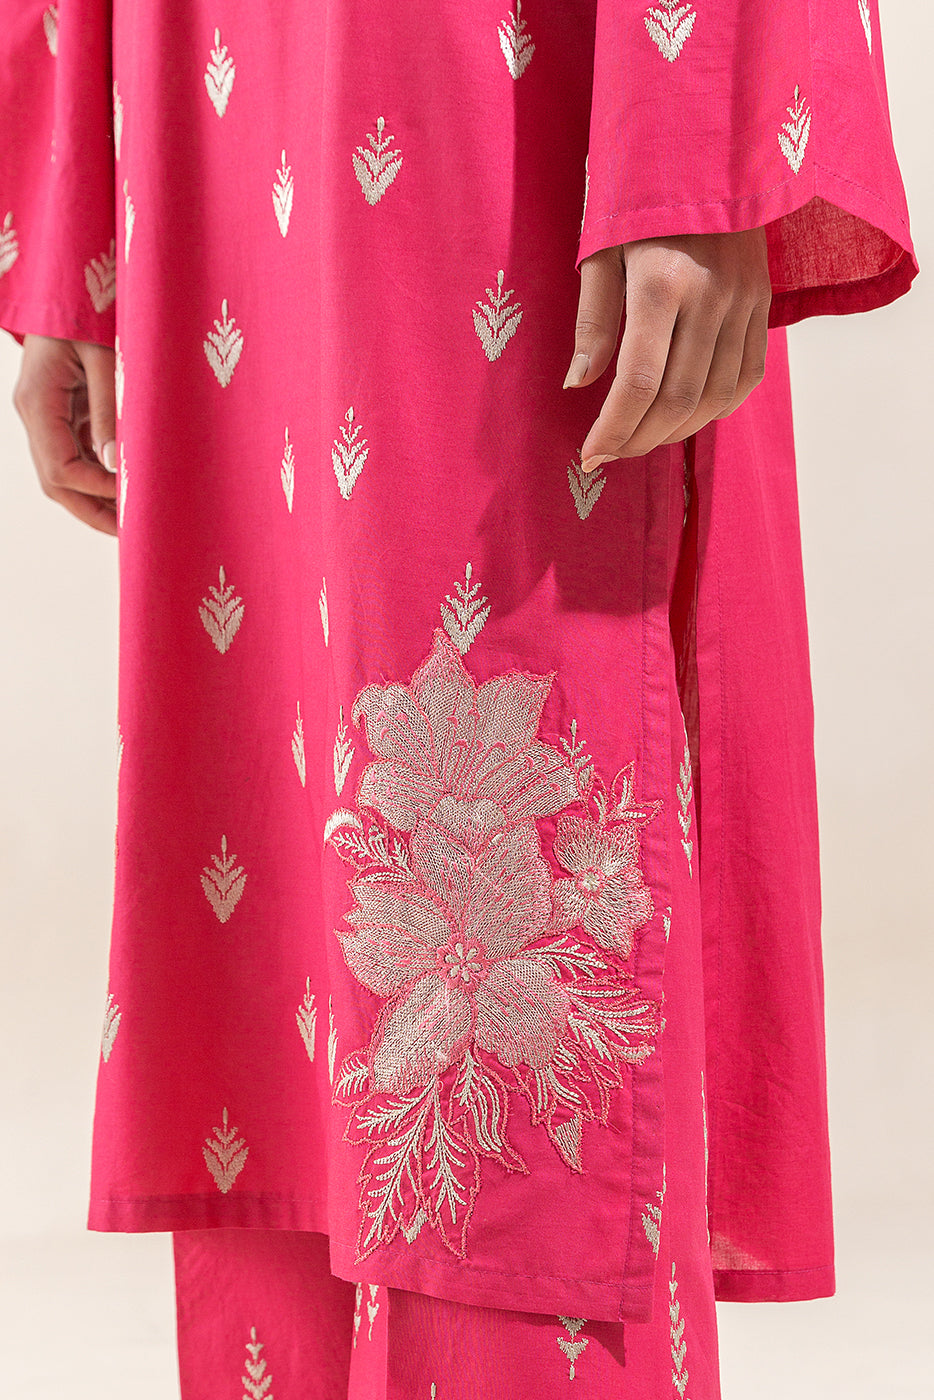 2 PIECE EMBROIDERED LAWN SUIT-PARADISE ROSE (UNSTITCHED)